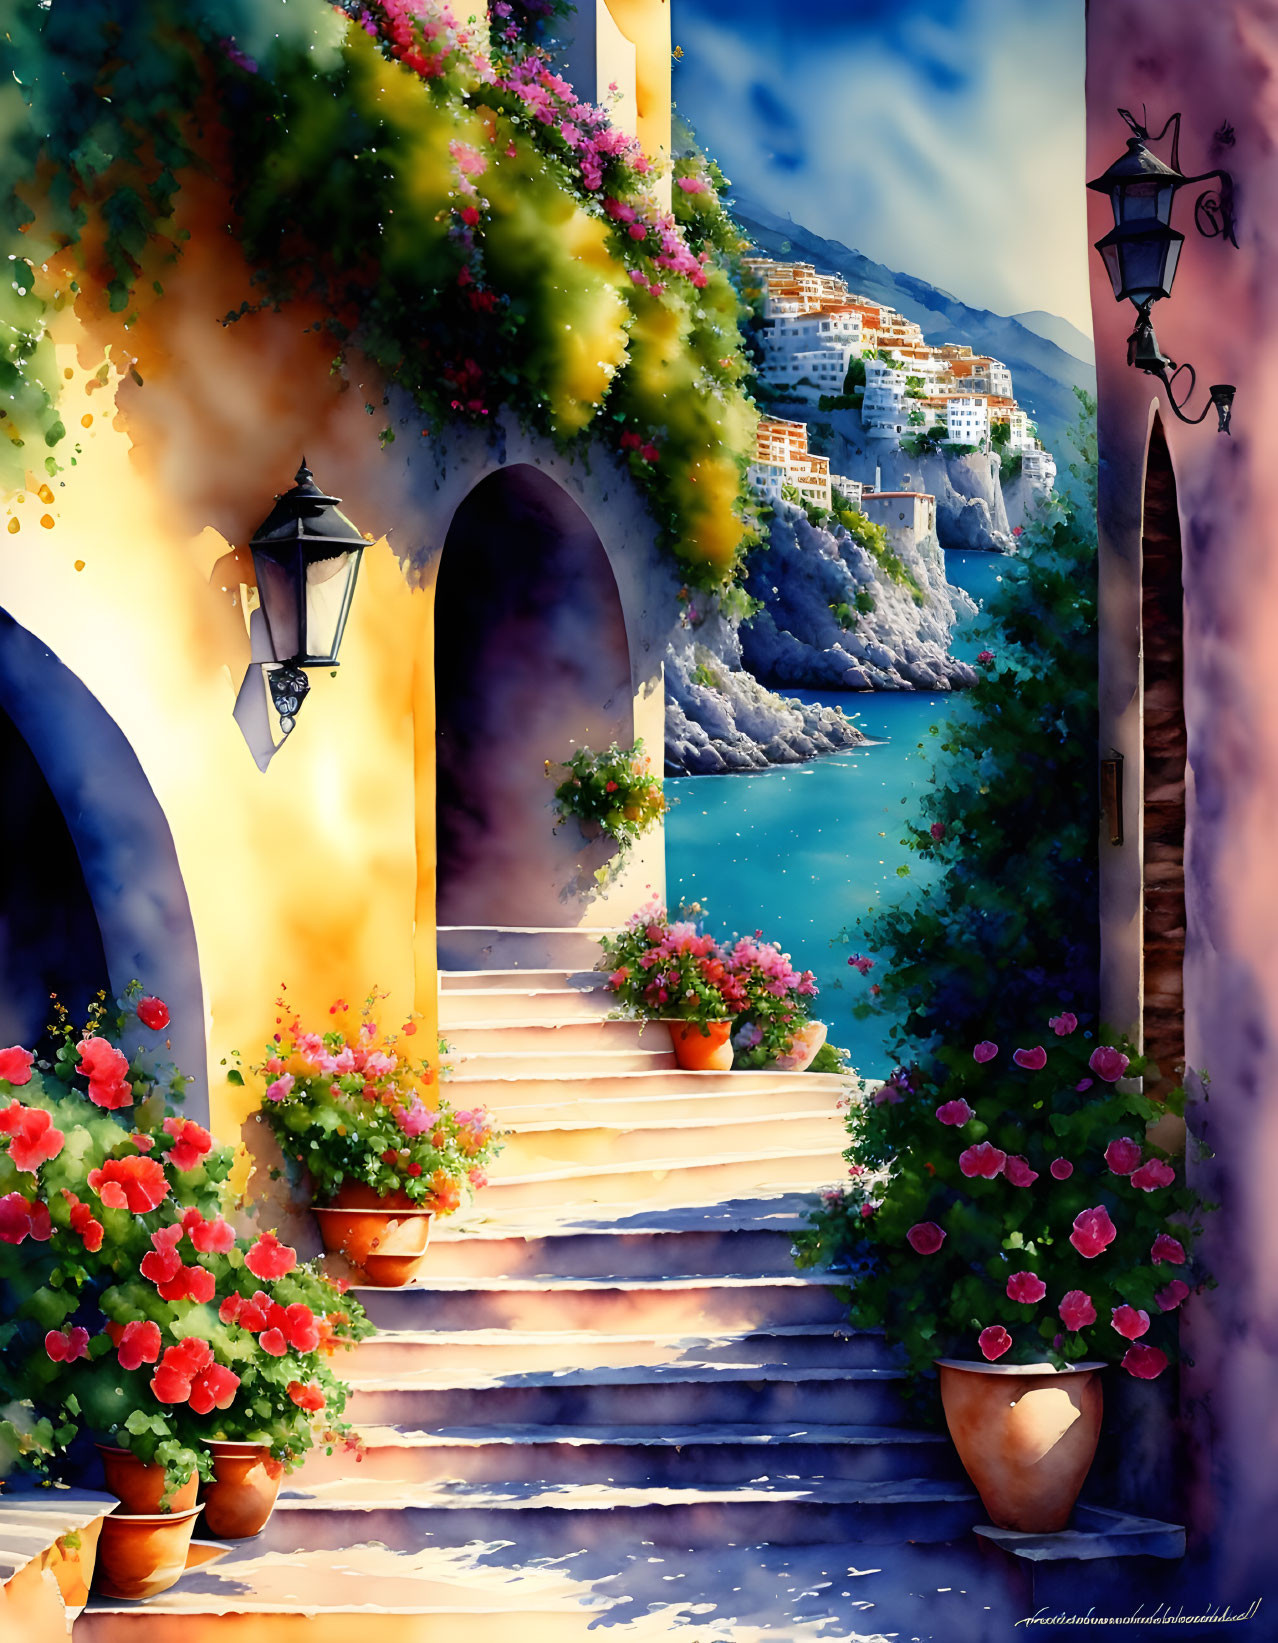 Colorful Mediterranean Seaside Village Illustration with Blooming Flowers and Sea View